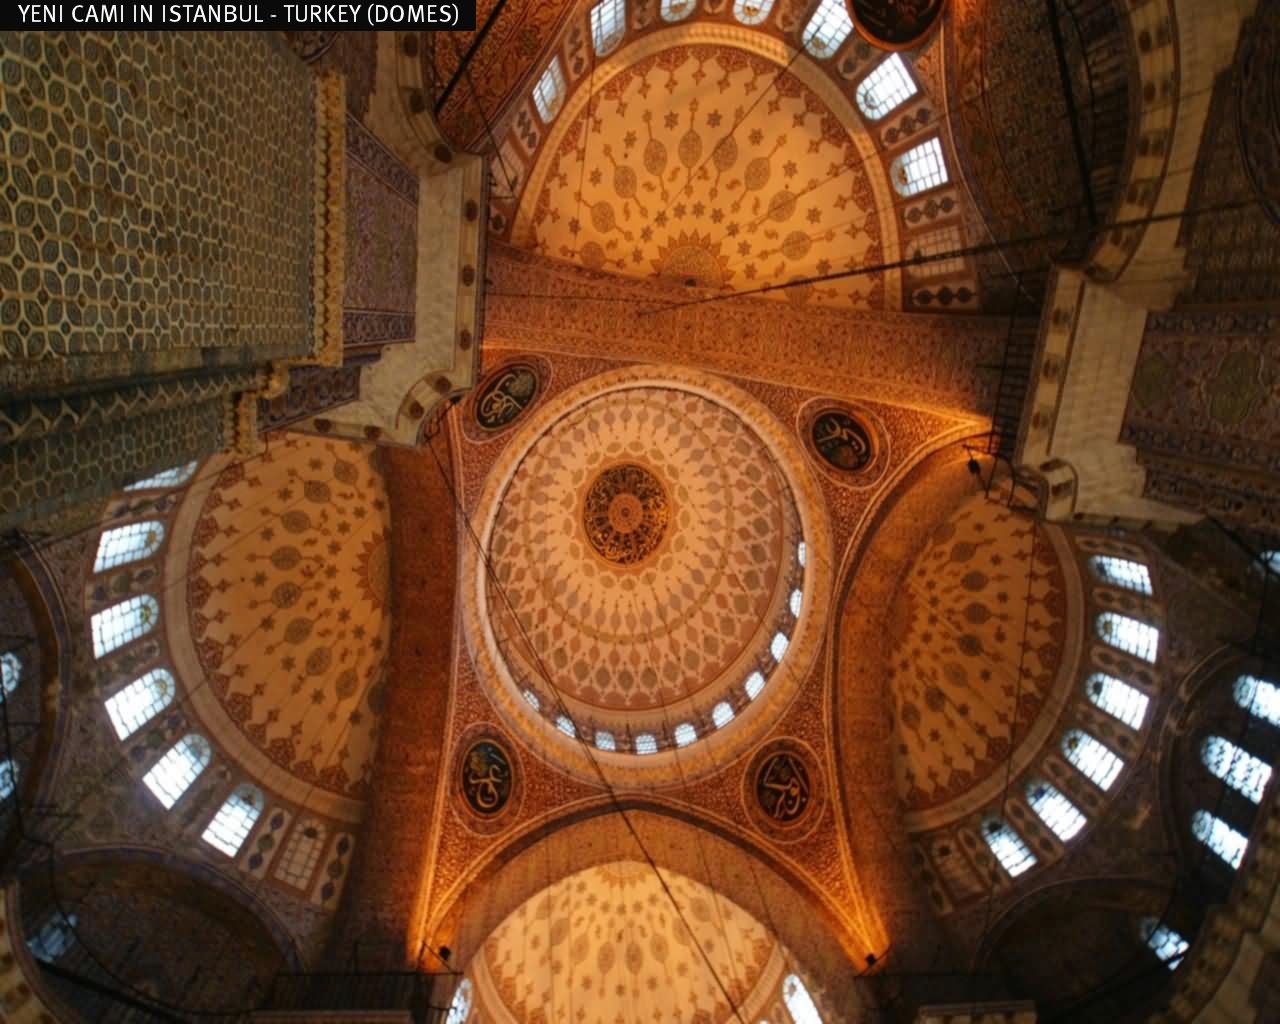 Domes Inside The Yeni Cami